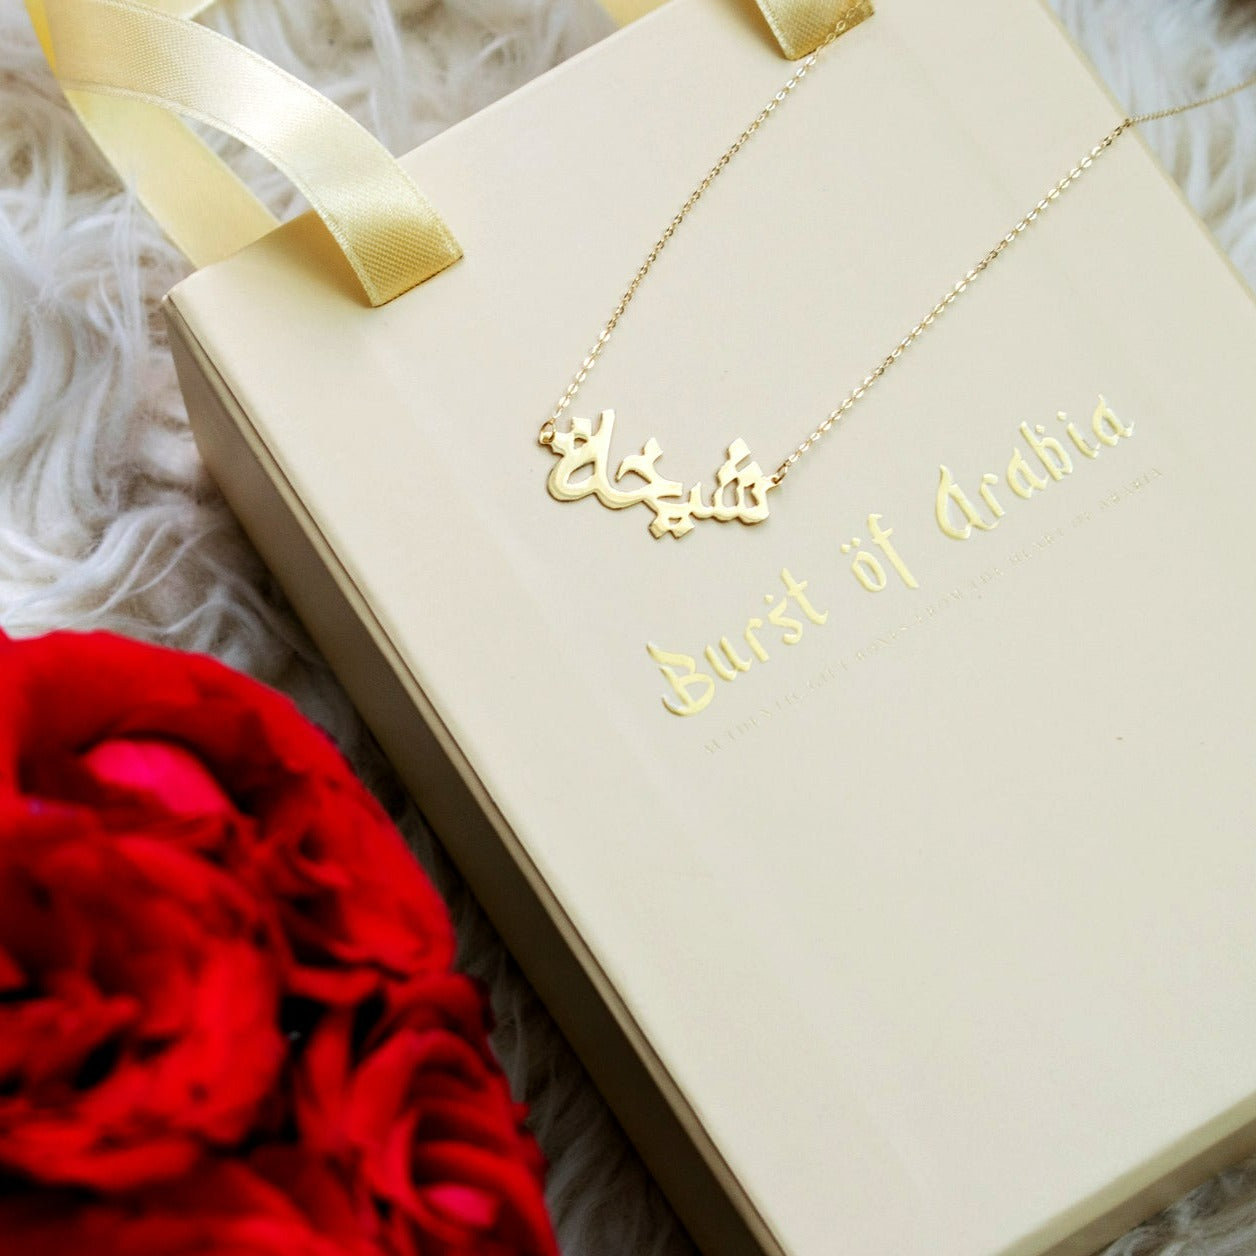 Shop Customized gifts in Dubai, Abu Dhabi, UAE. Order personalized jewelry for women. Luxury gift for wife, birthday gift for girlfriend, anniversary gifts for her.